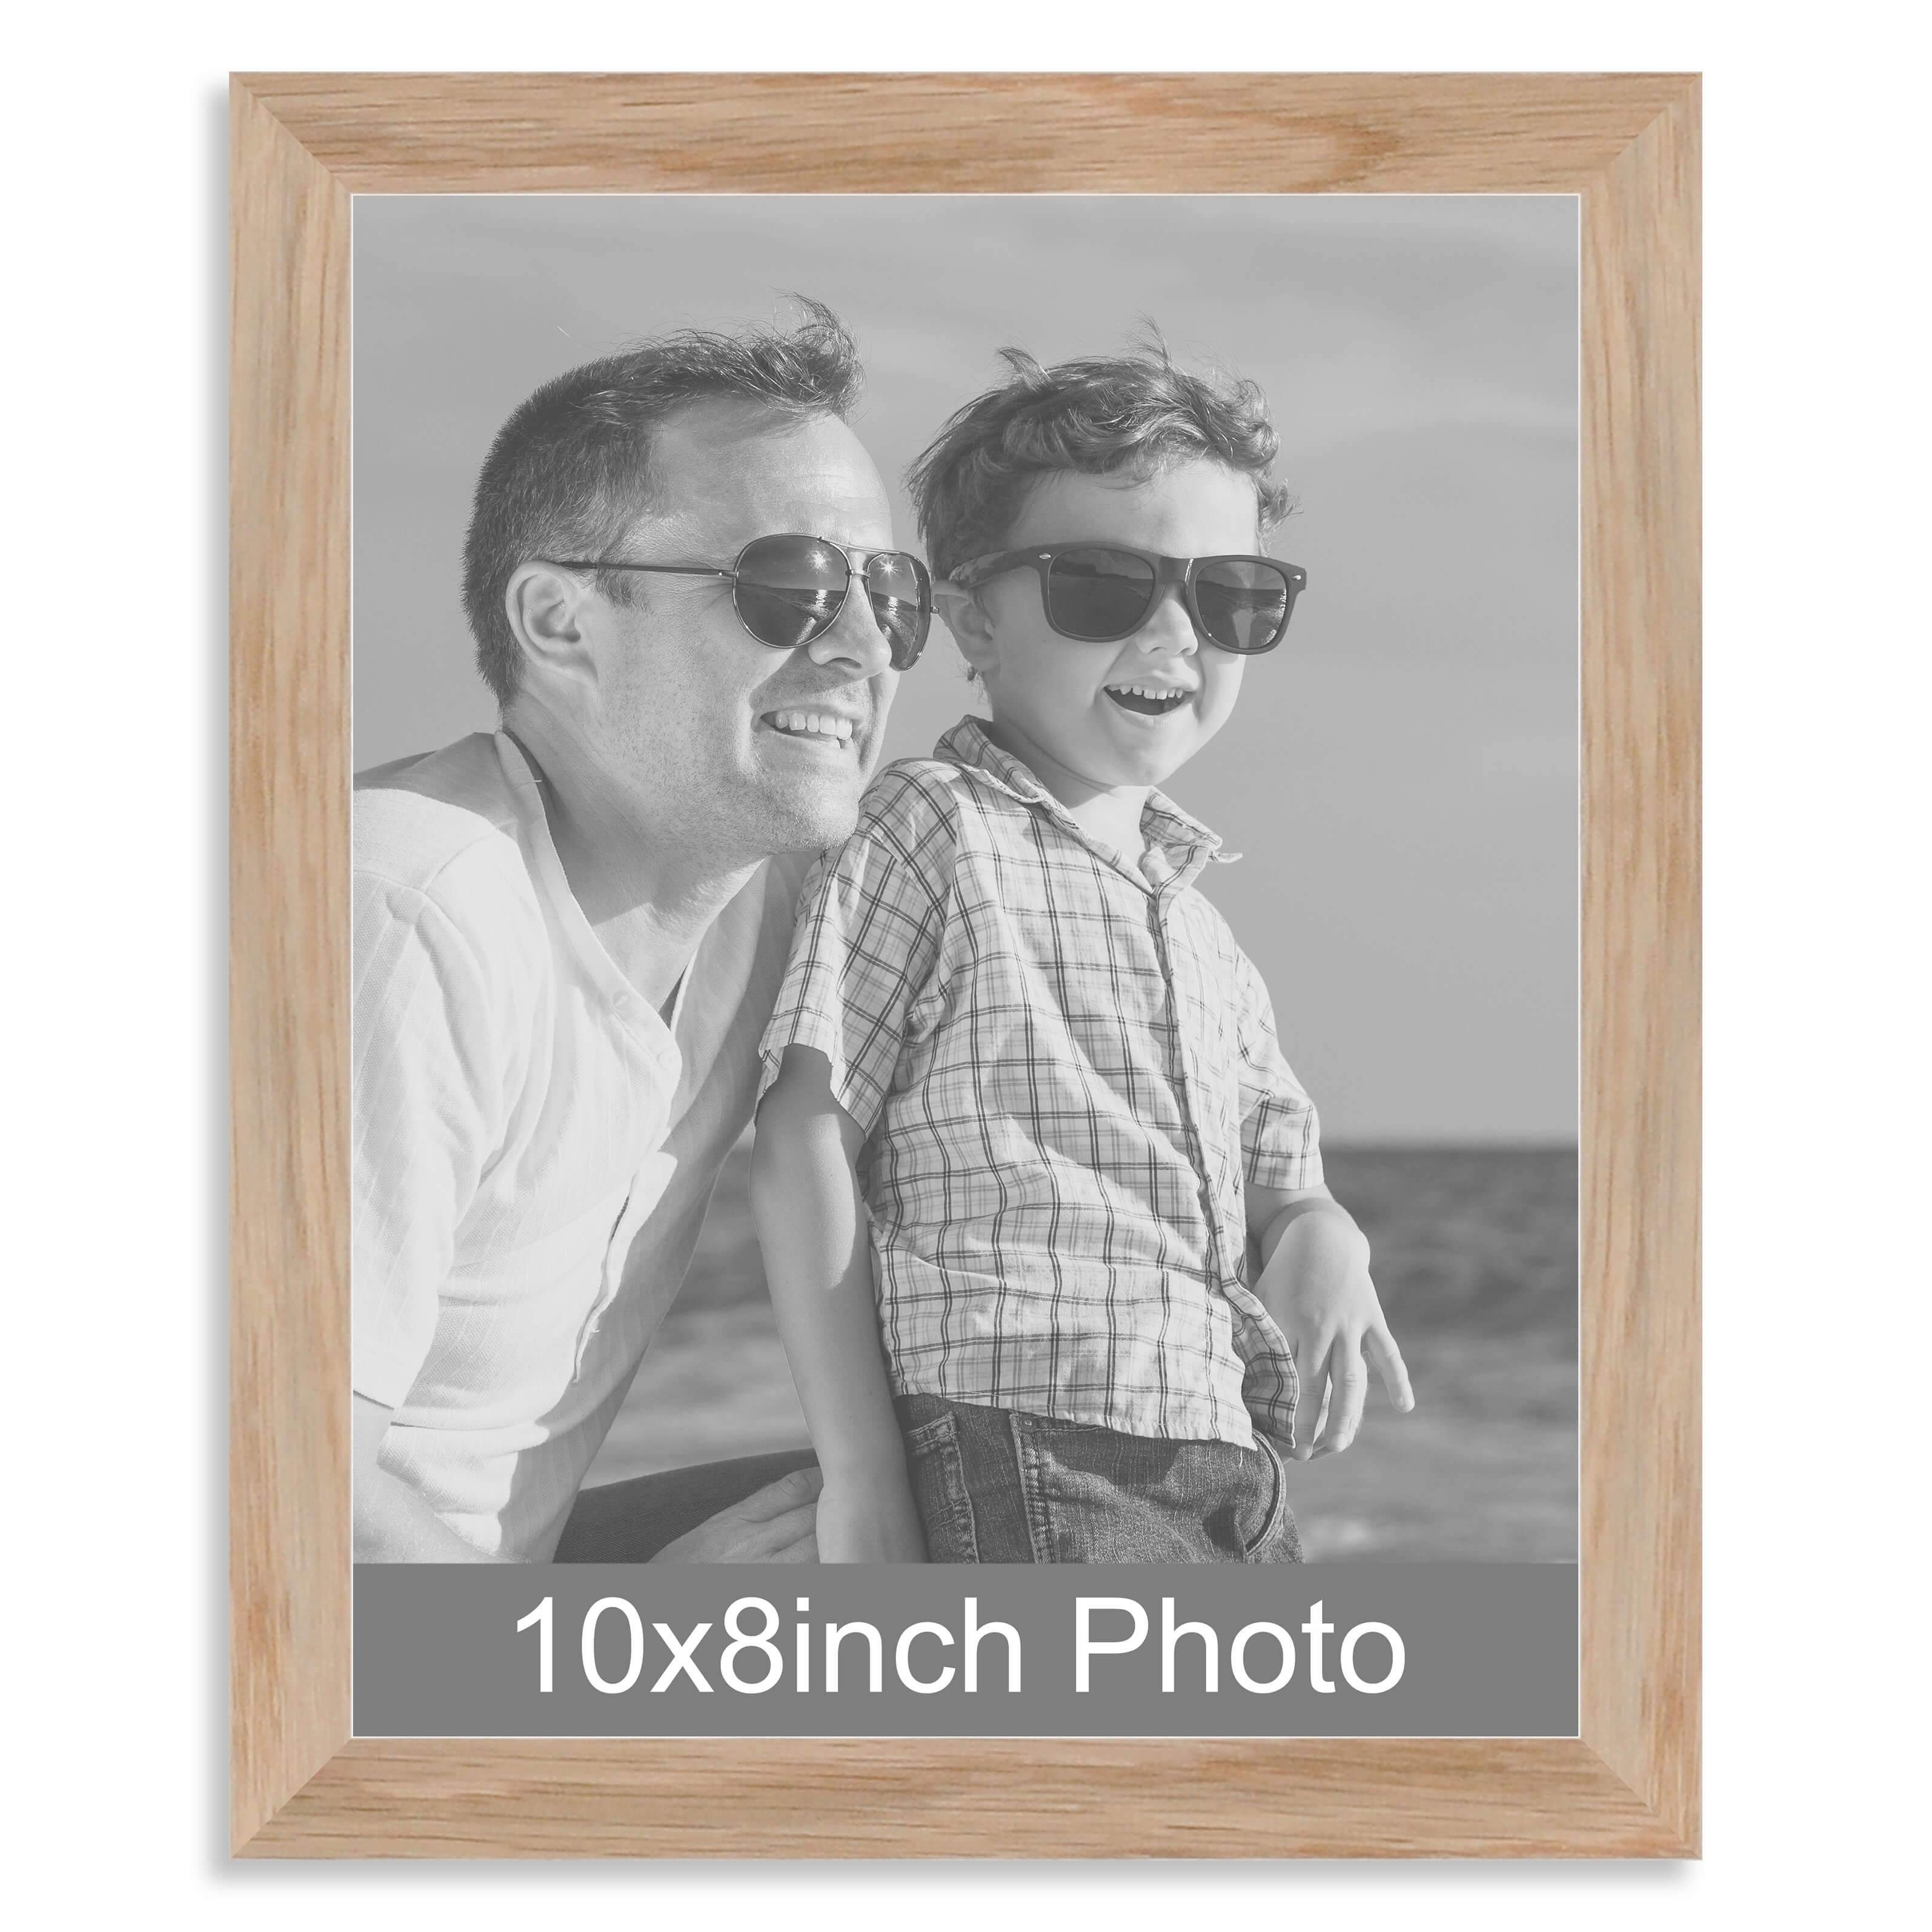 10 x 8inch Solid Oak Photo Frame for a 10×8/8x10in image – Photo uploaded below (select Choose File)